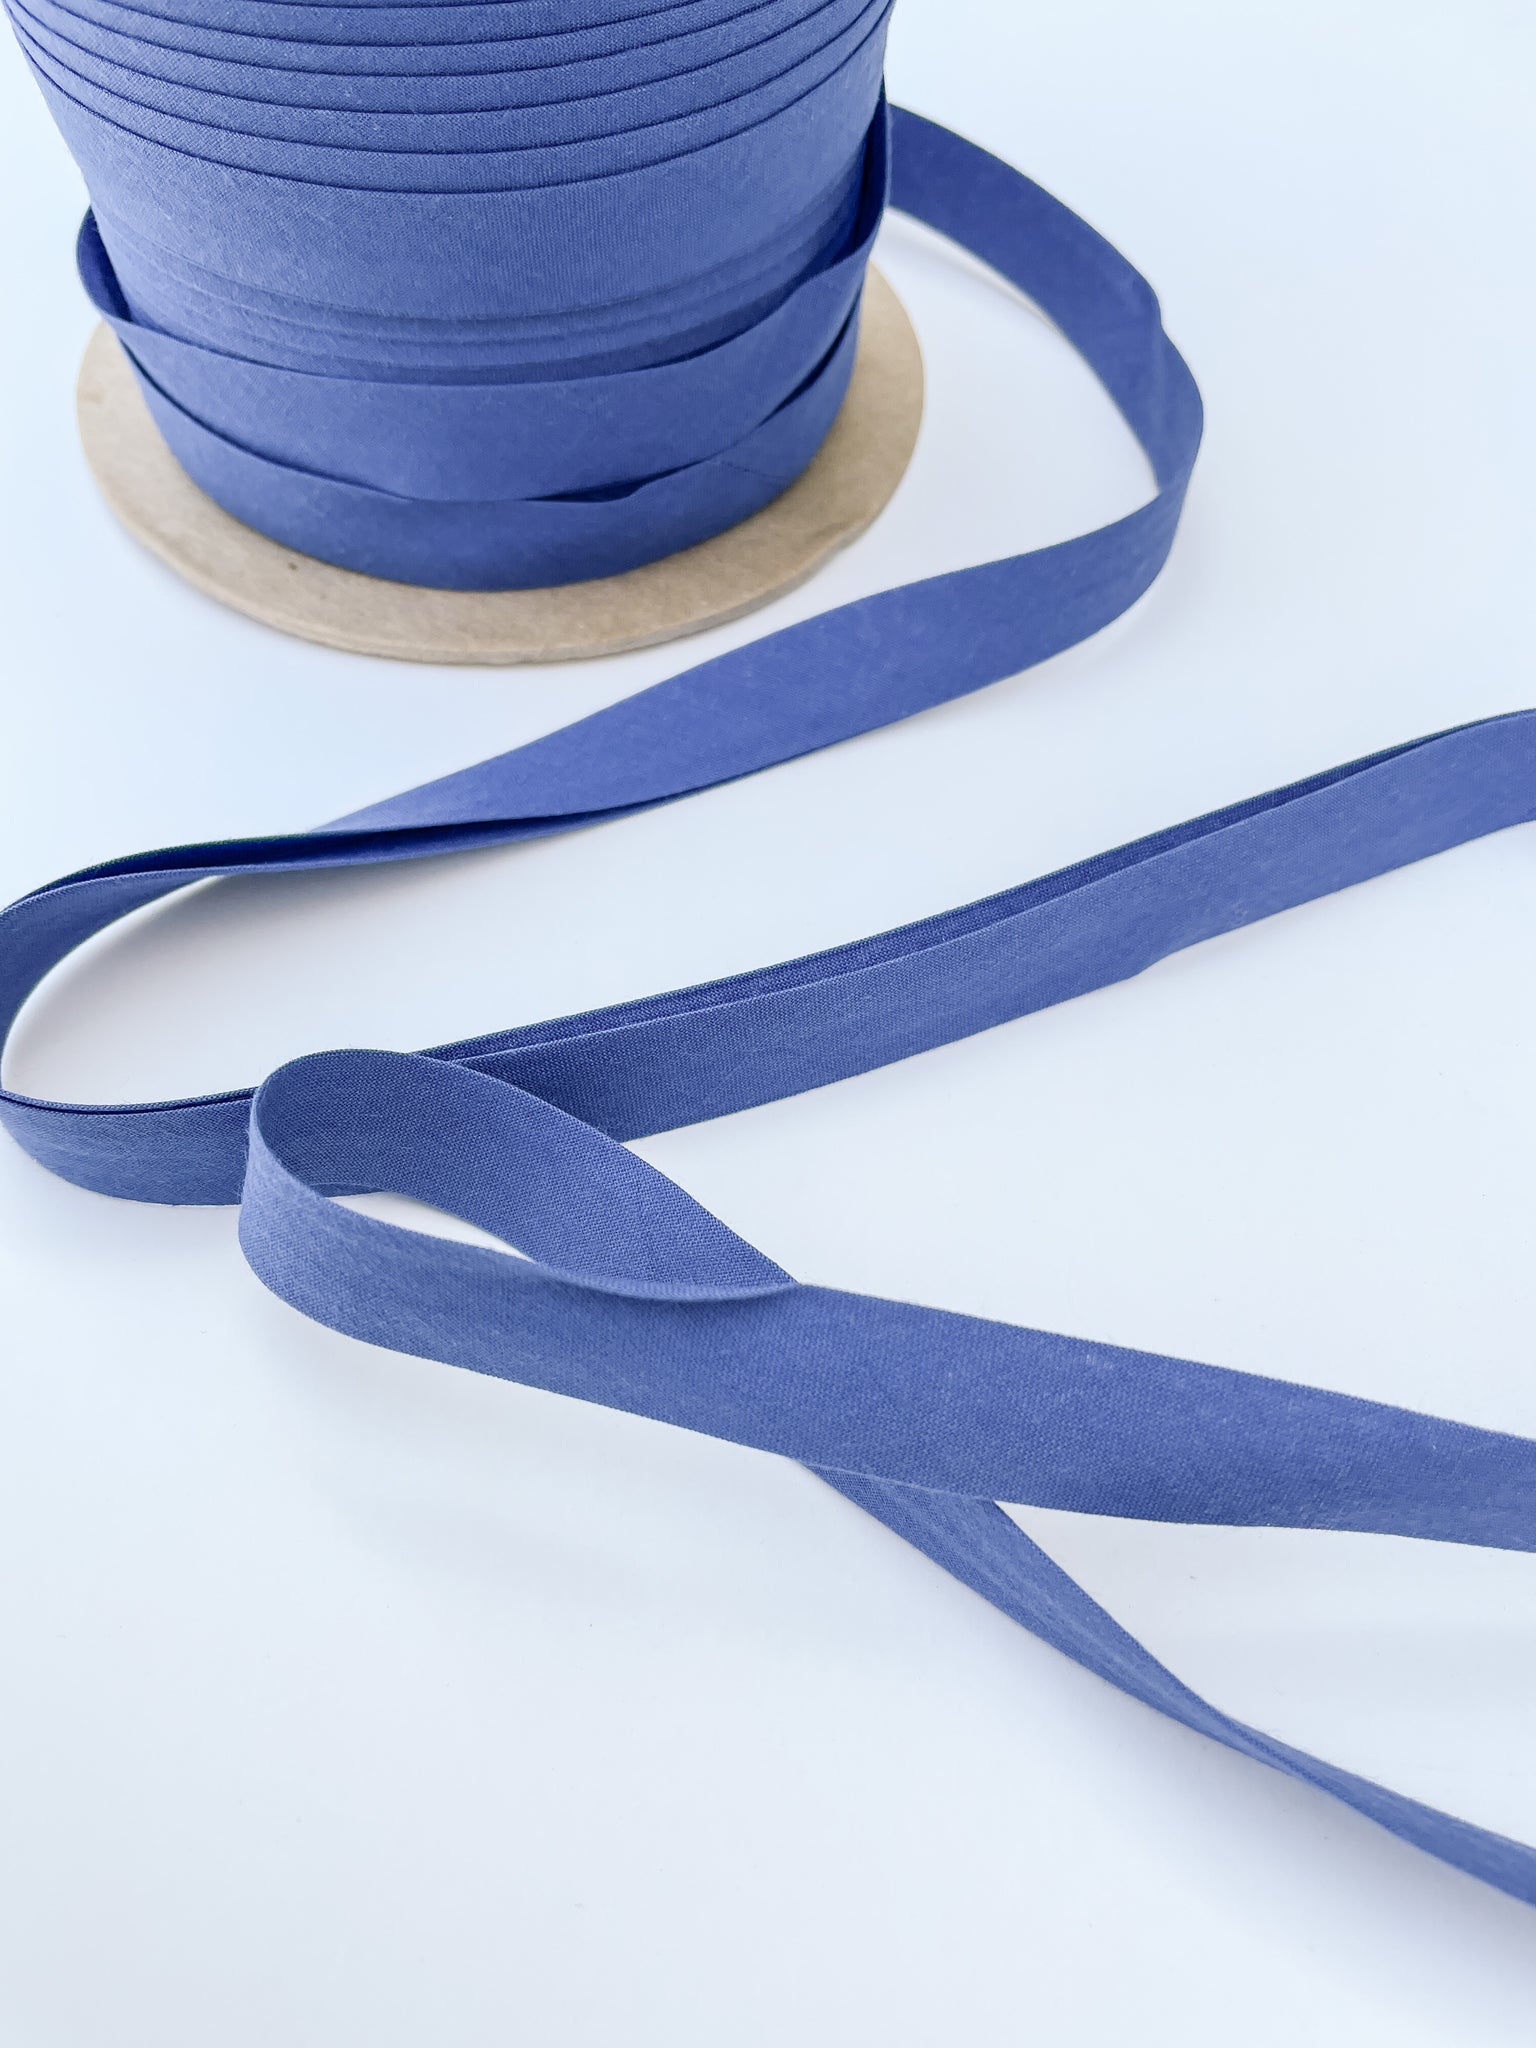 SALE Cotton Bias Tape By the Yard - Blue